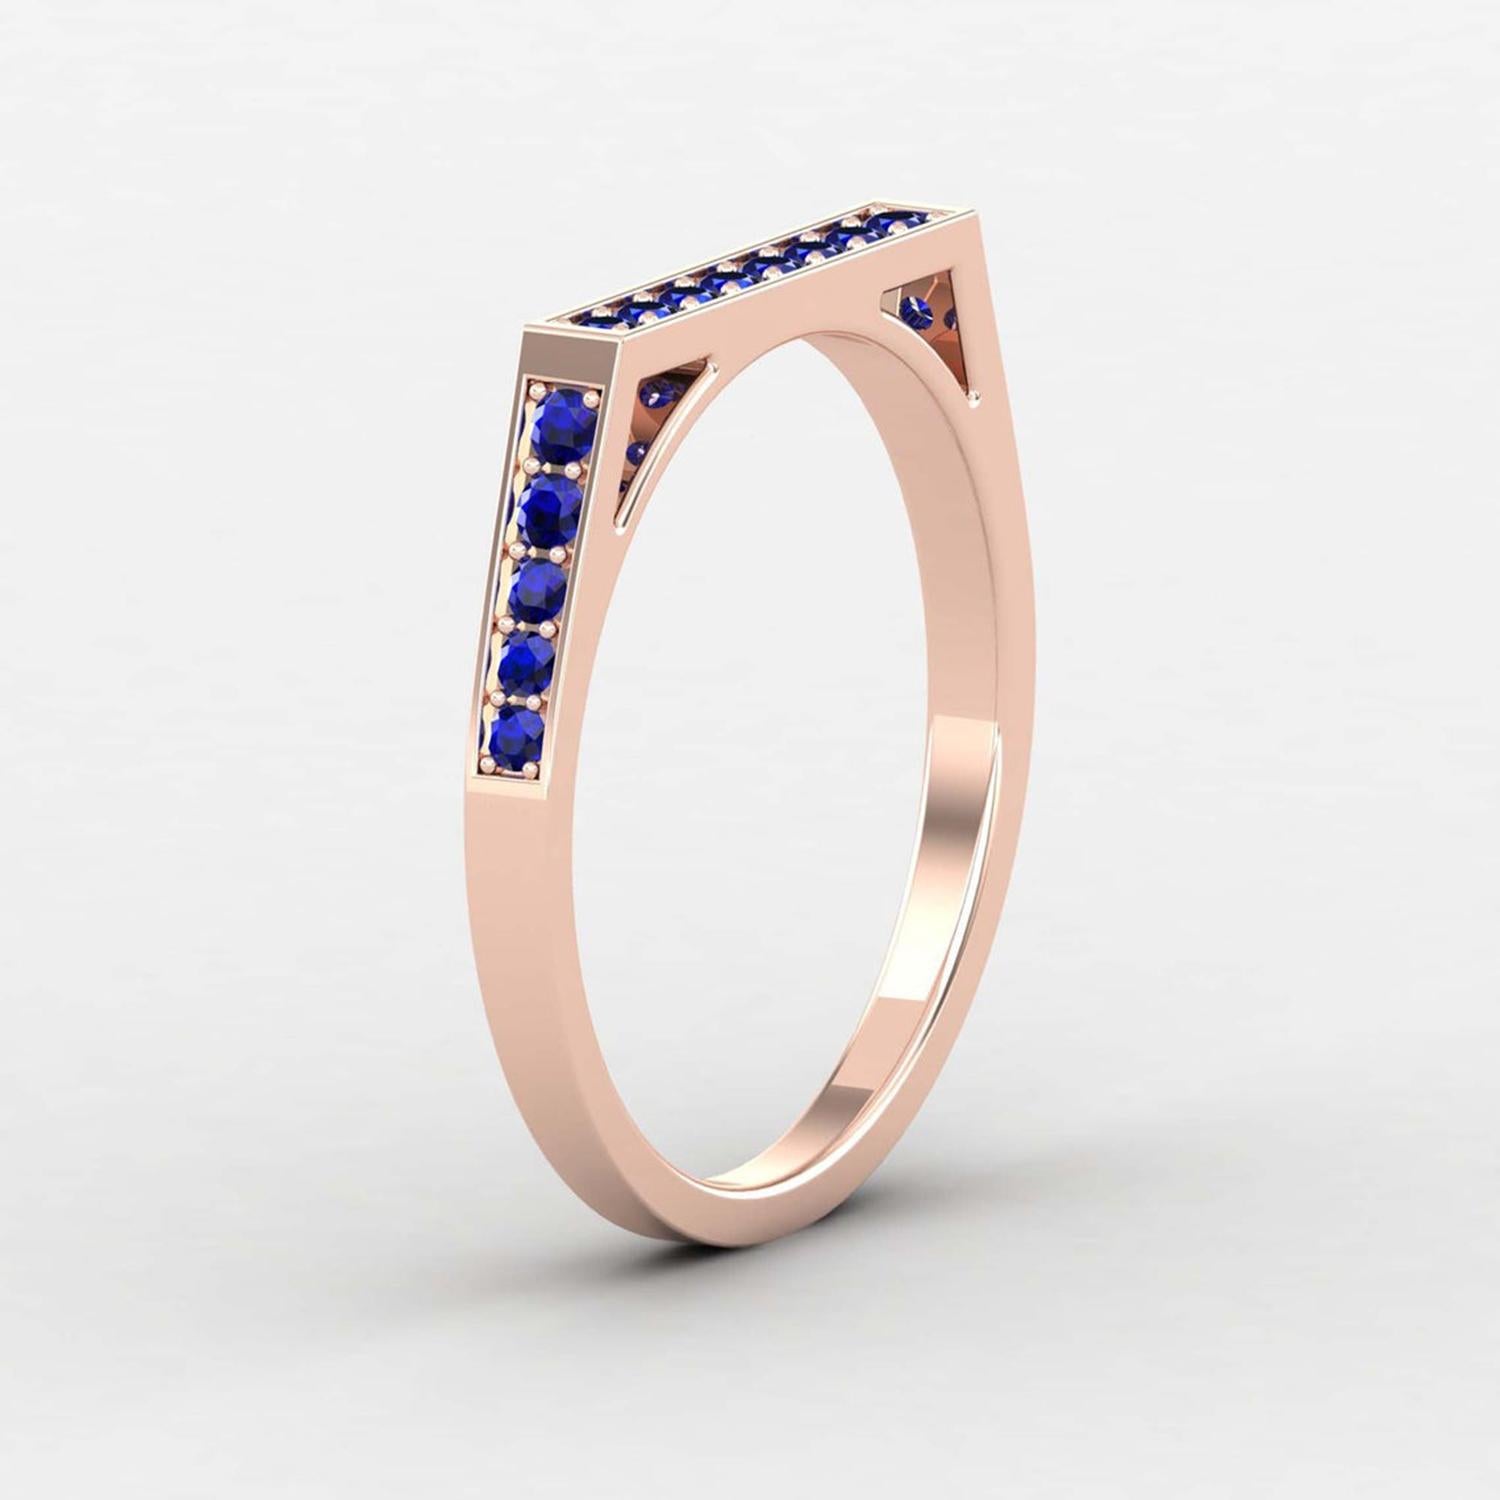 Round Cut 14 karat Gold Round Blue Sapphire Ring / Gold Engagement Ring / Ring for Her For Sale